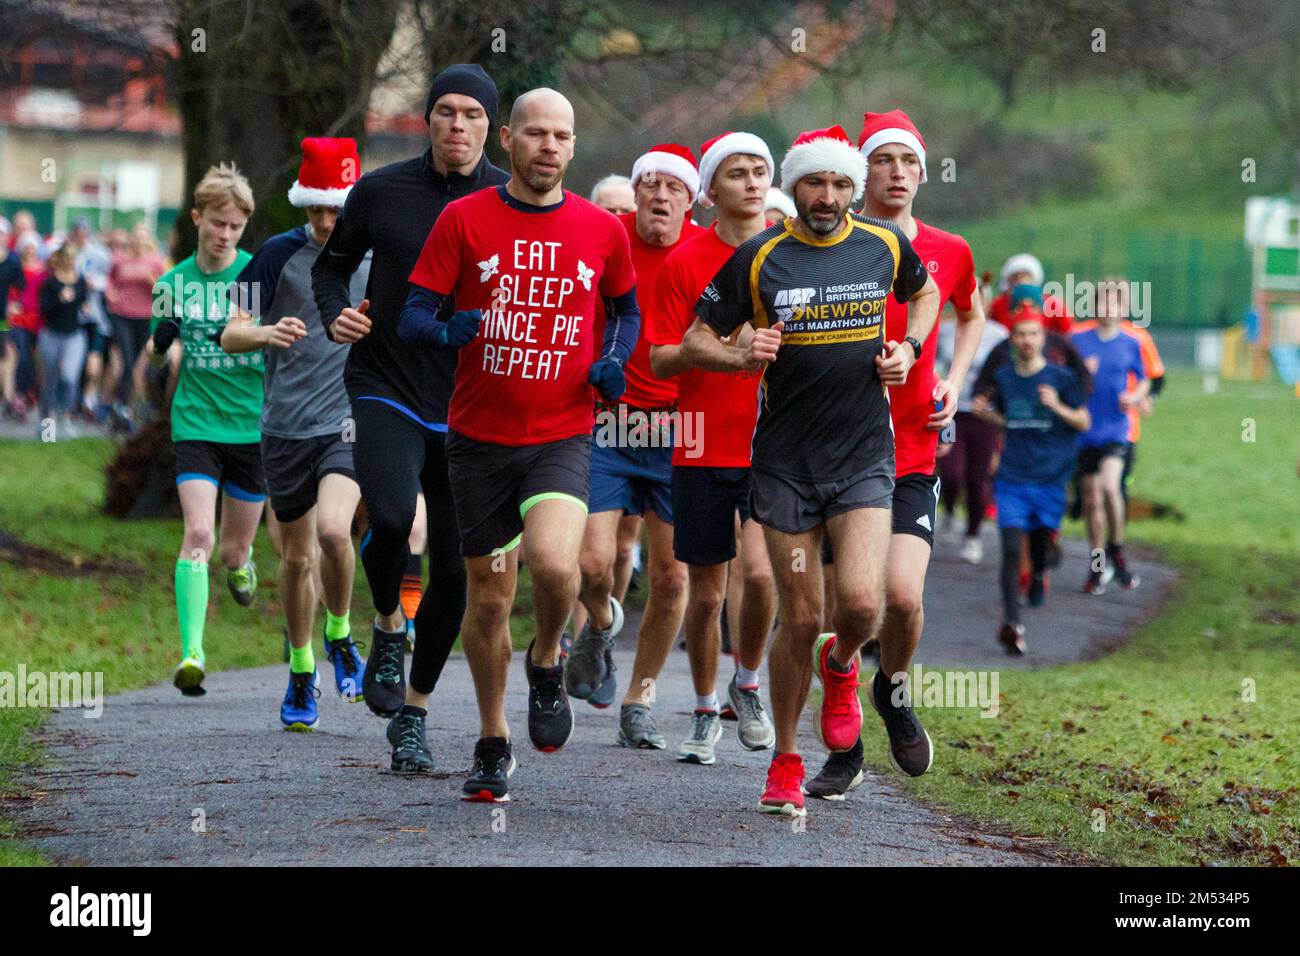 Chippenham, Wiltshire, UK. 25th December, 2022. Runners are pictured as they take part in an early morning Christmas day 5km park run in Monkton Park, Chippenham, Wiltshire. The wet weather did nothing to dampen the spirits of the 200-300 people who participated in the event with many of them dressing up in fancy dress. Credit: Lynchpics/Alamy Live News Stock Photo